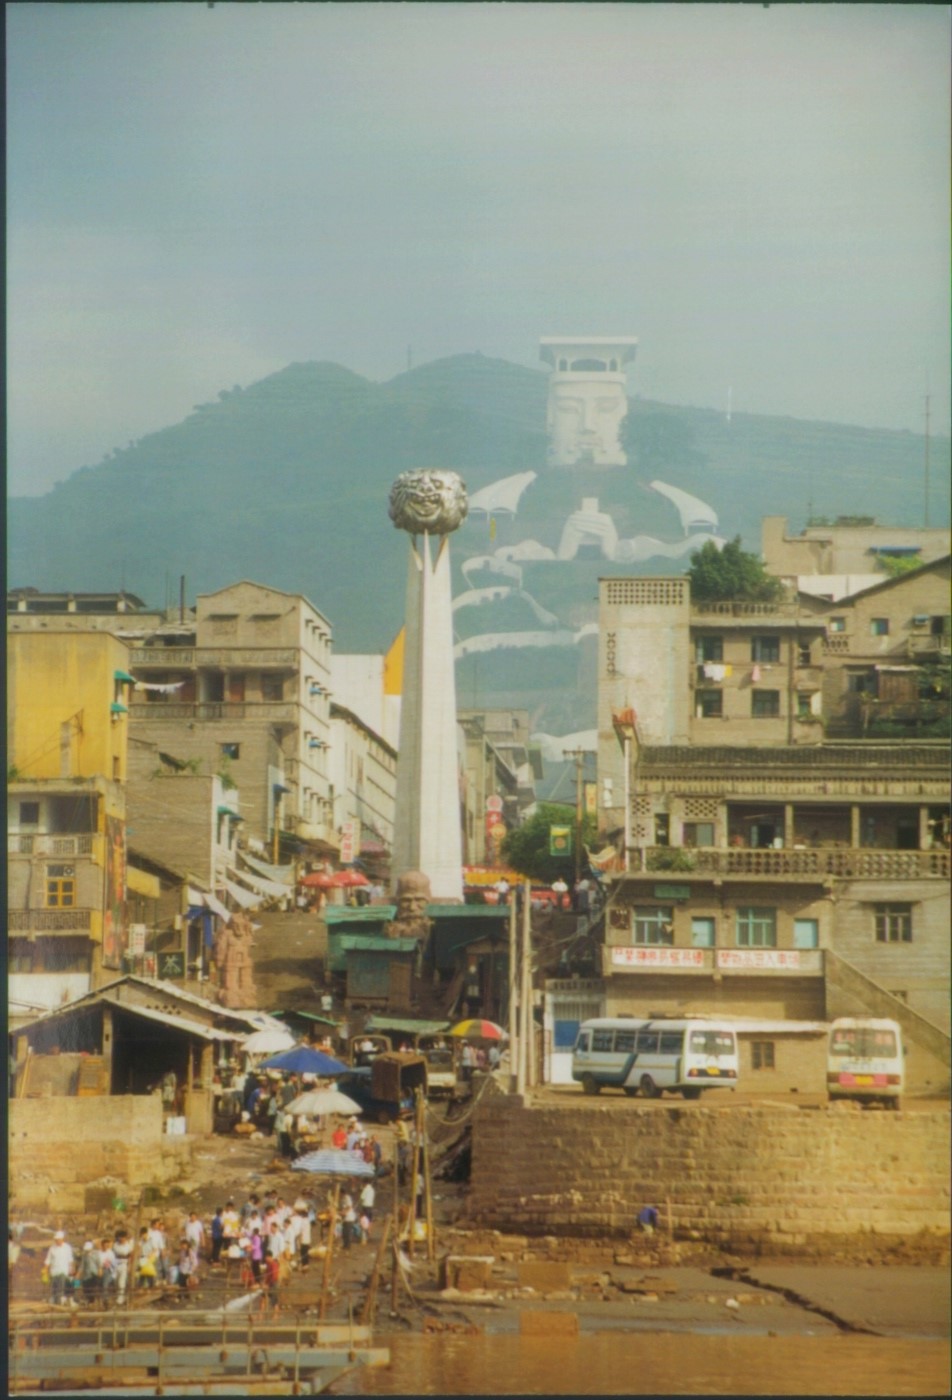 fengdu ghost town in 1999 on yangtze river before three gorges dam